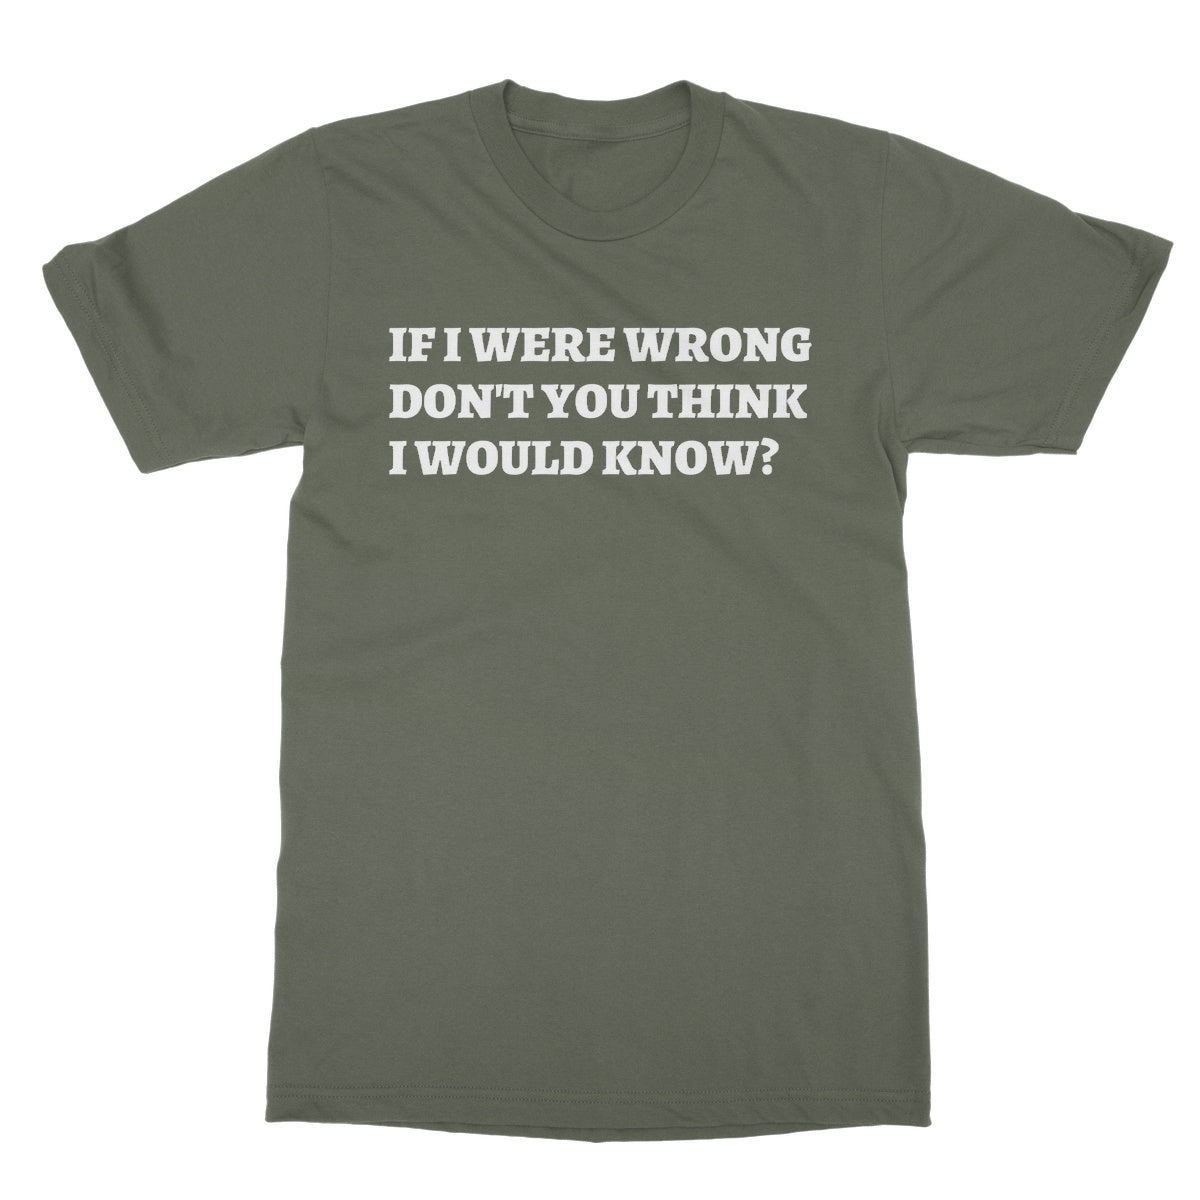 if I were wrong don't you think I would know t shirt green